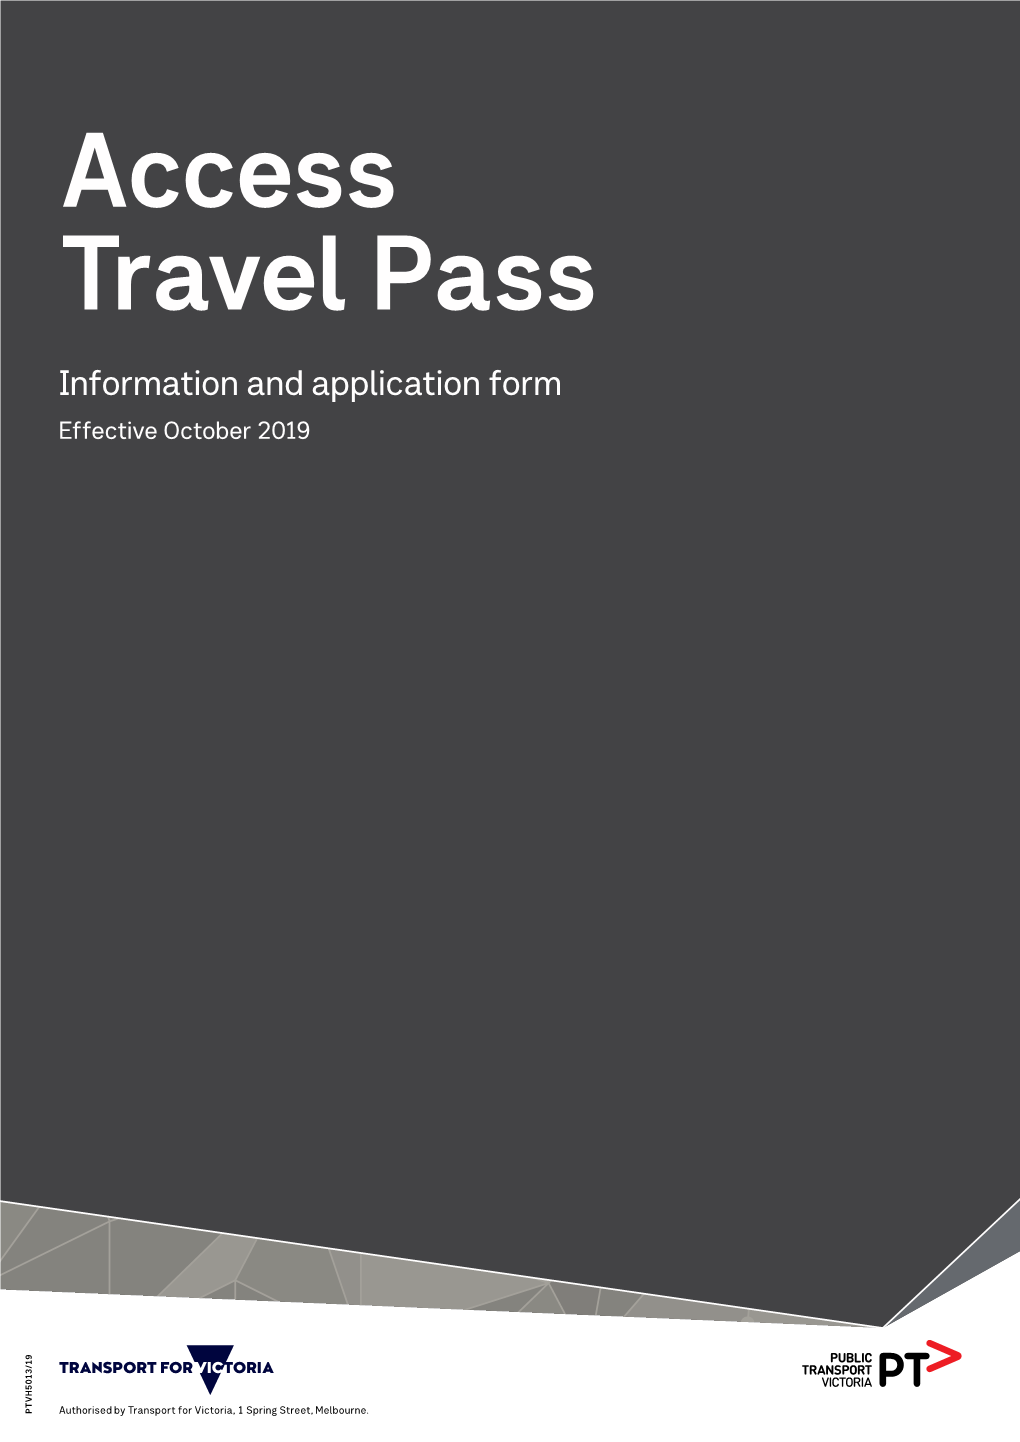 Access Travel Pass Application Form